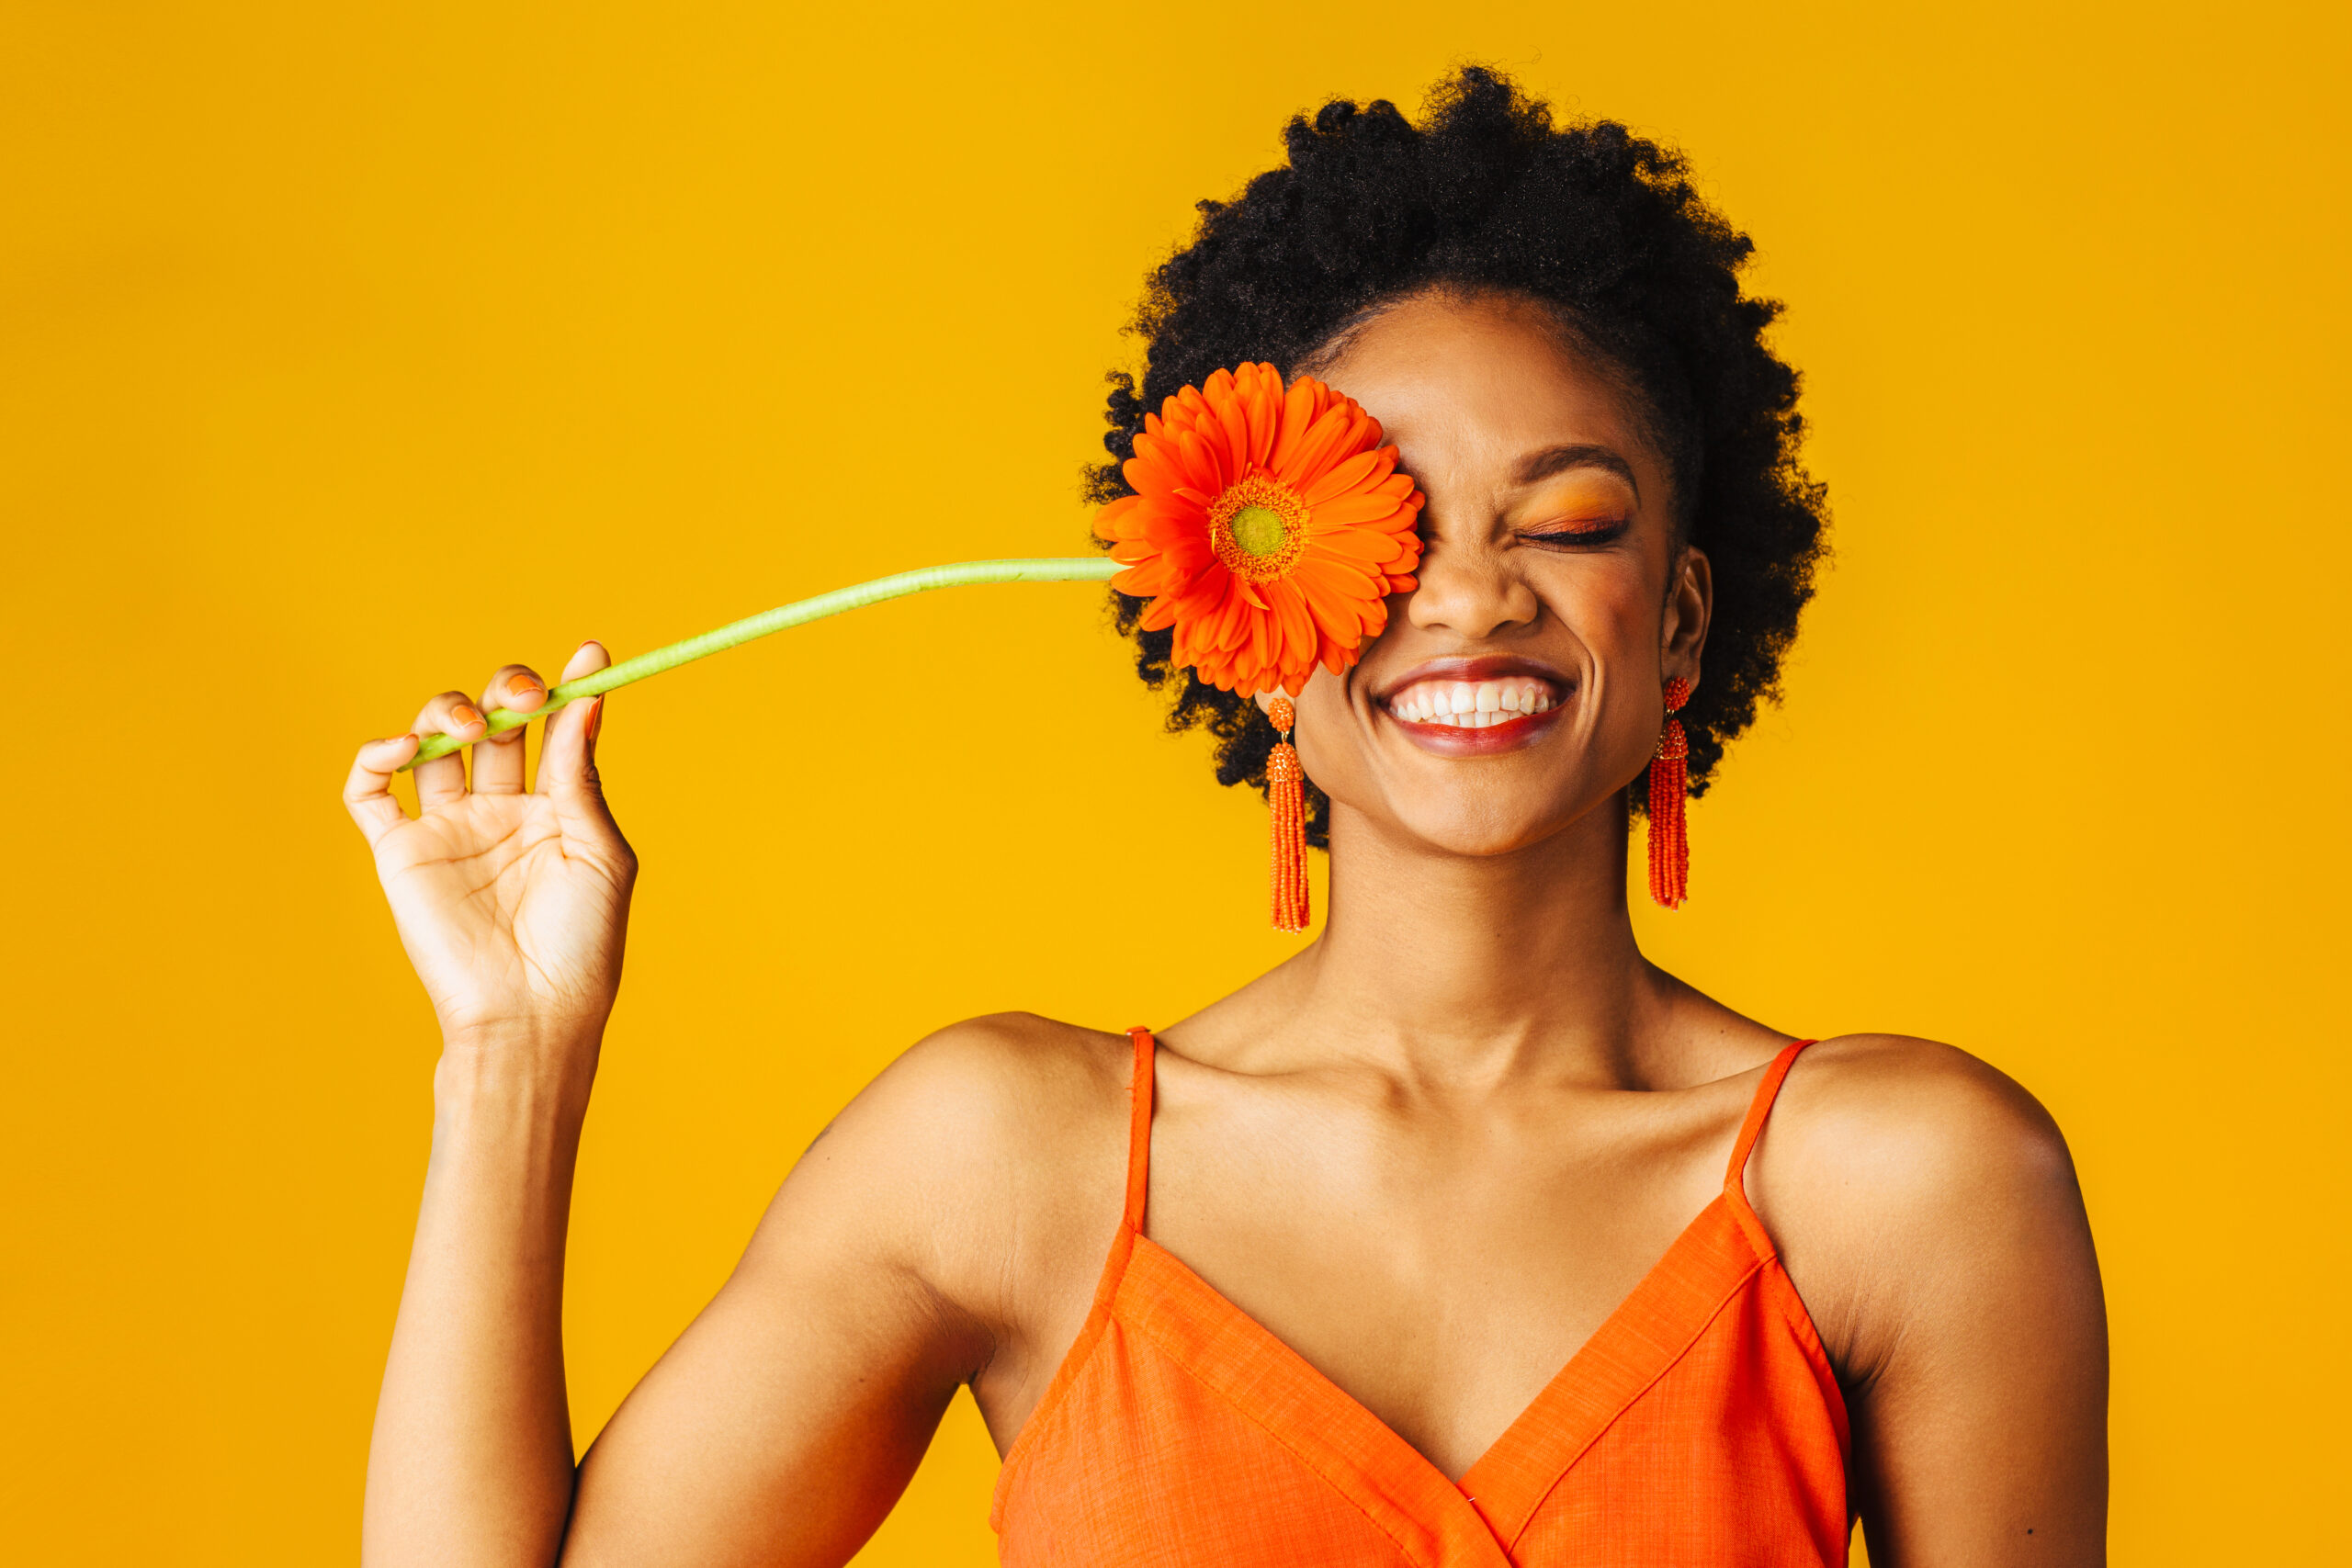 Portrait of a happy young woman holding orange Gerbera daisy covering her eye with eyes closed